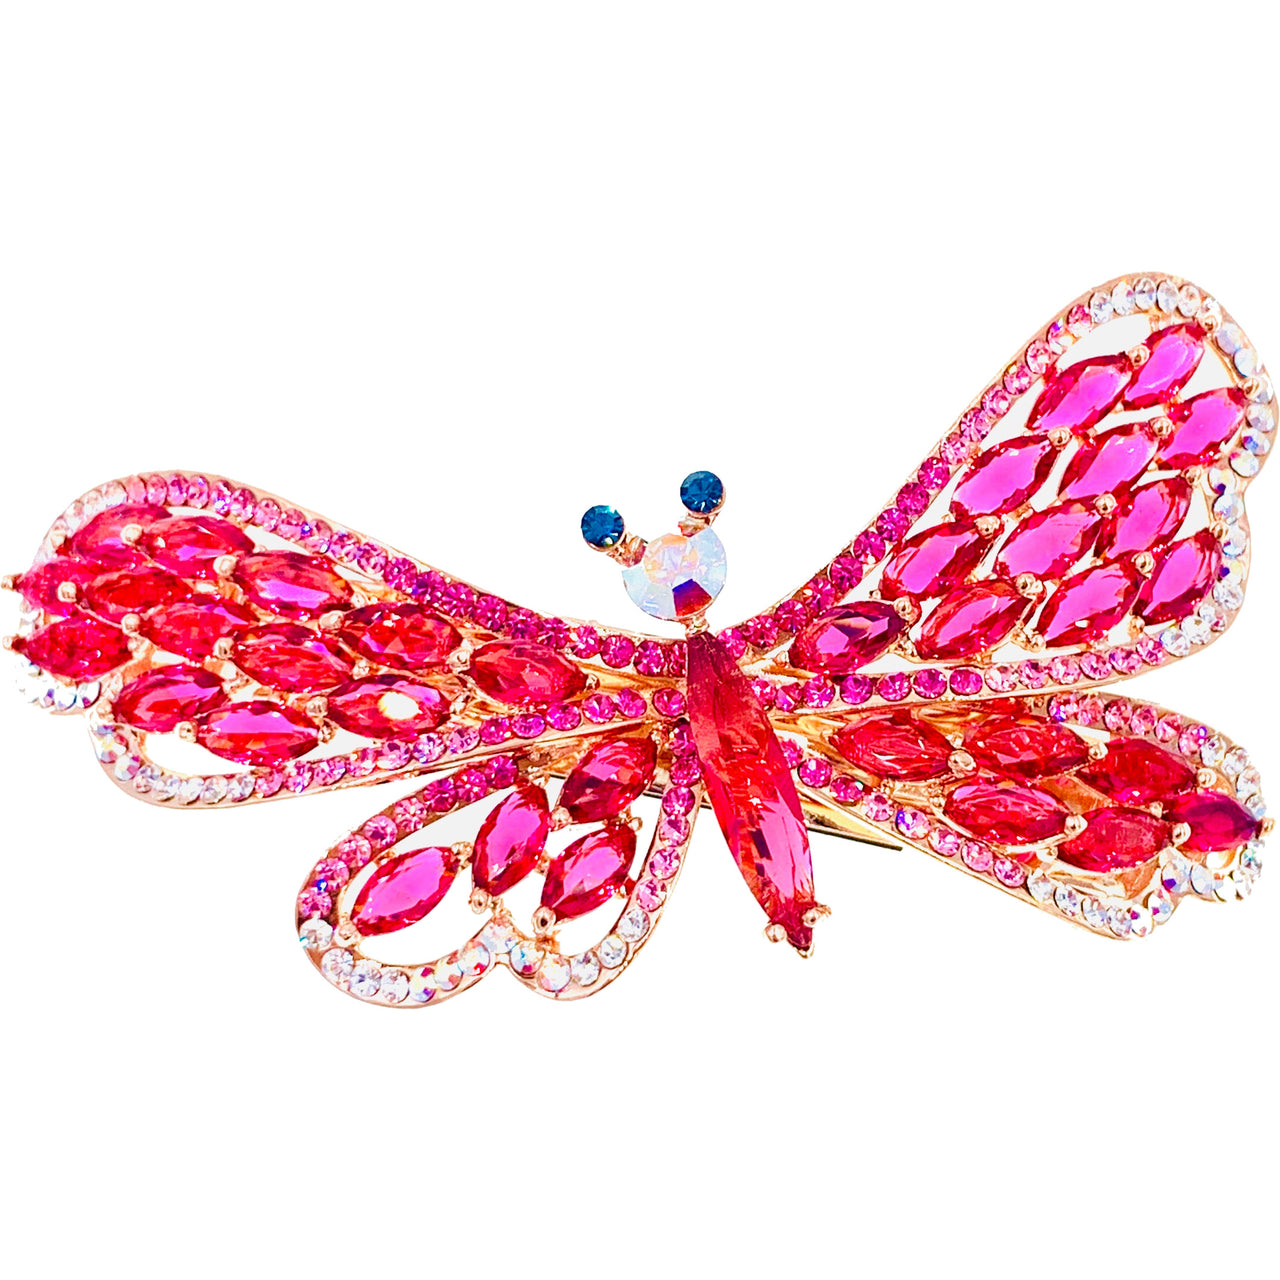 Monique Dragonfly Barrette Cubic Zirconia CZ Crystal gold base clear purple pink brown amber, Barrette - MOGHANT